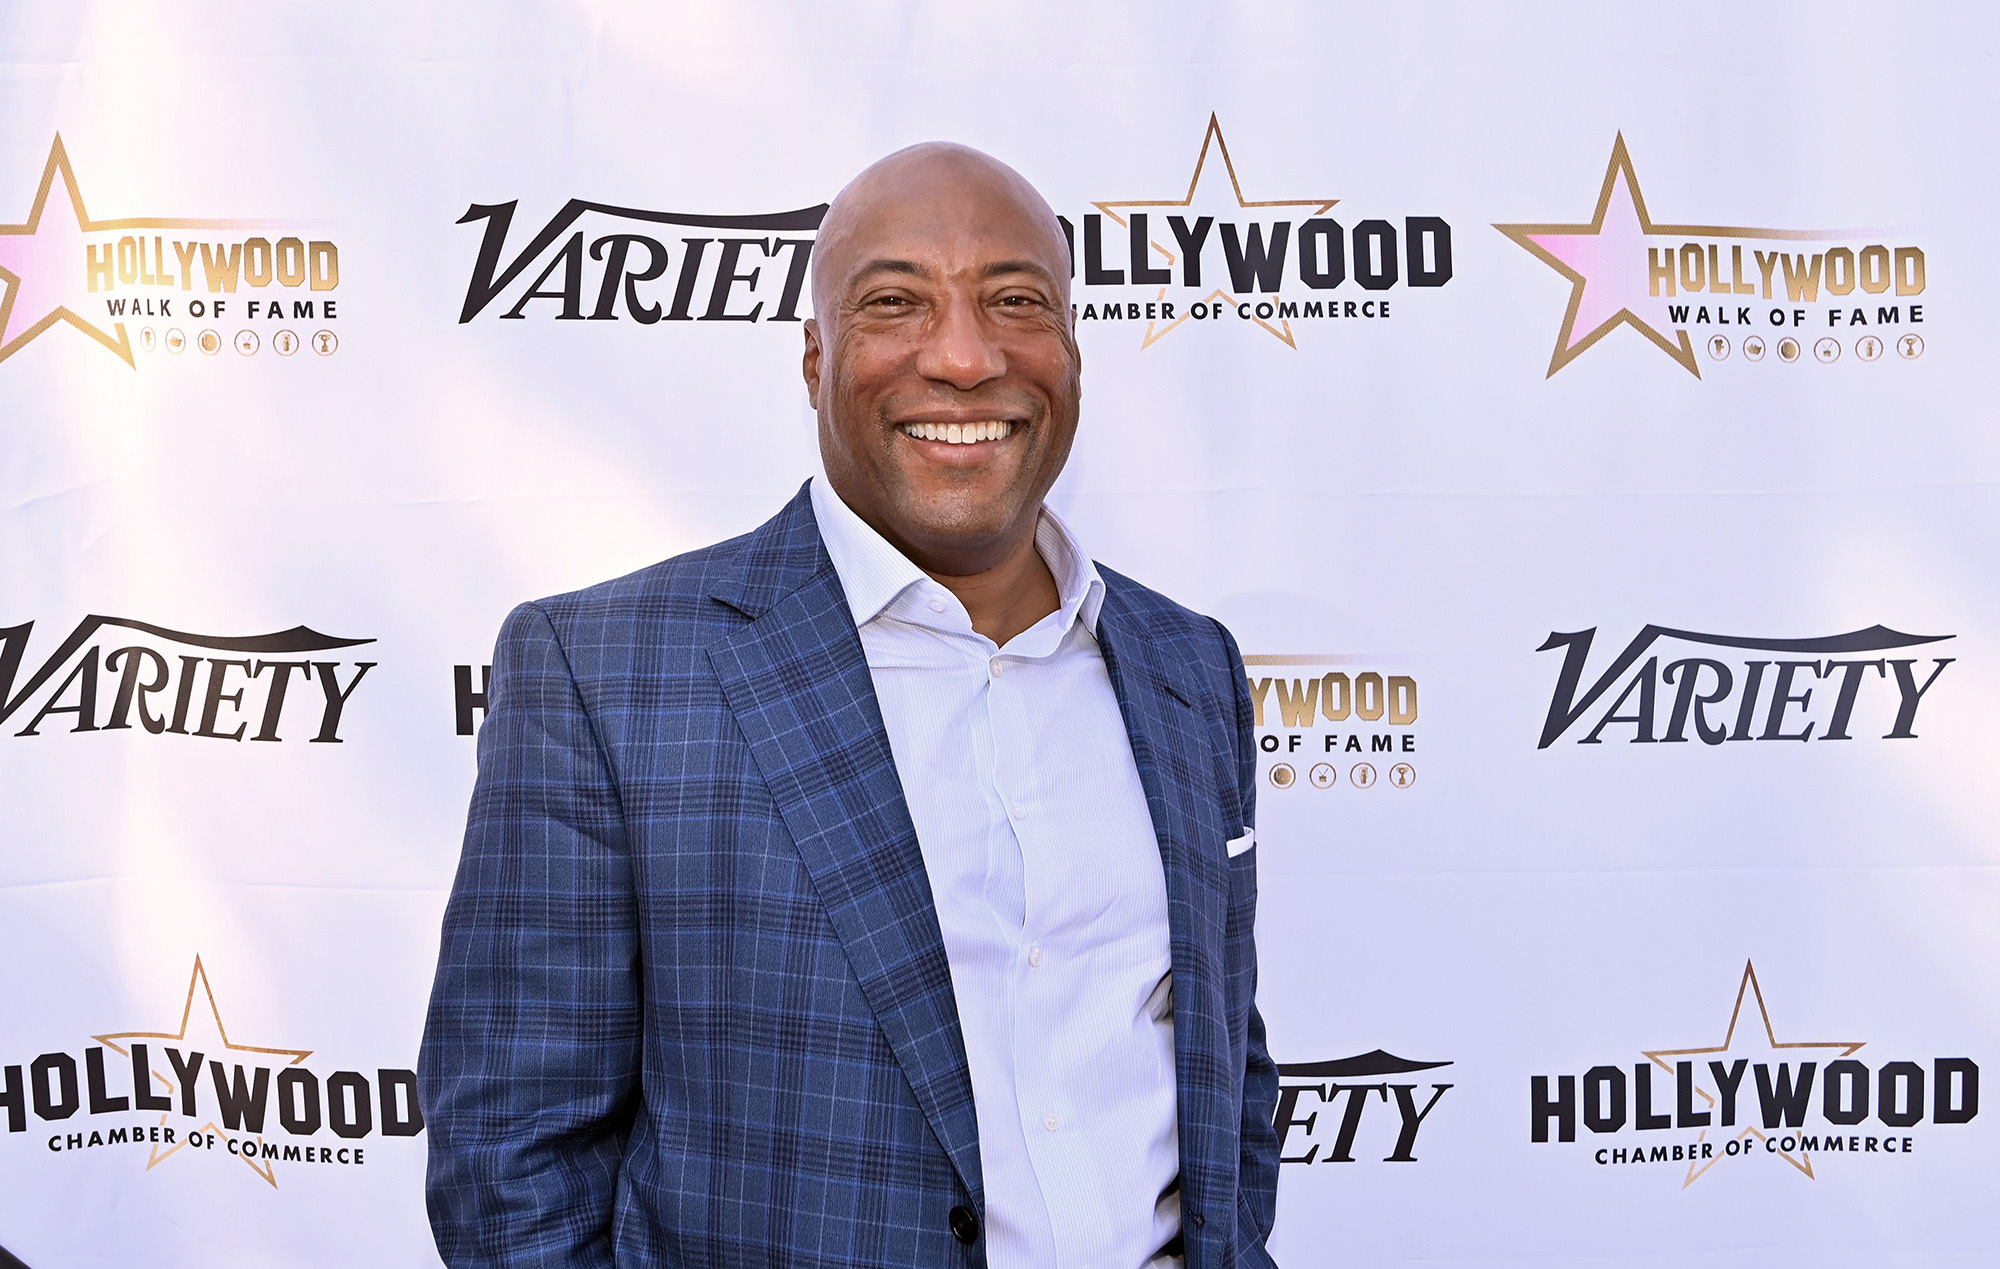 LOS ANGELES, CALIFORNIA - OCTOBER 20: Byron Allen, Founder, Chairman & CEO of Allen Media Group...